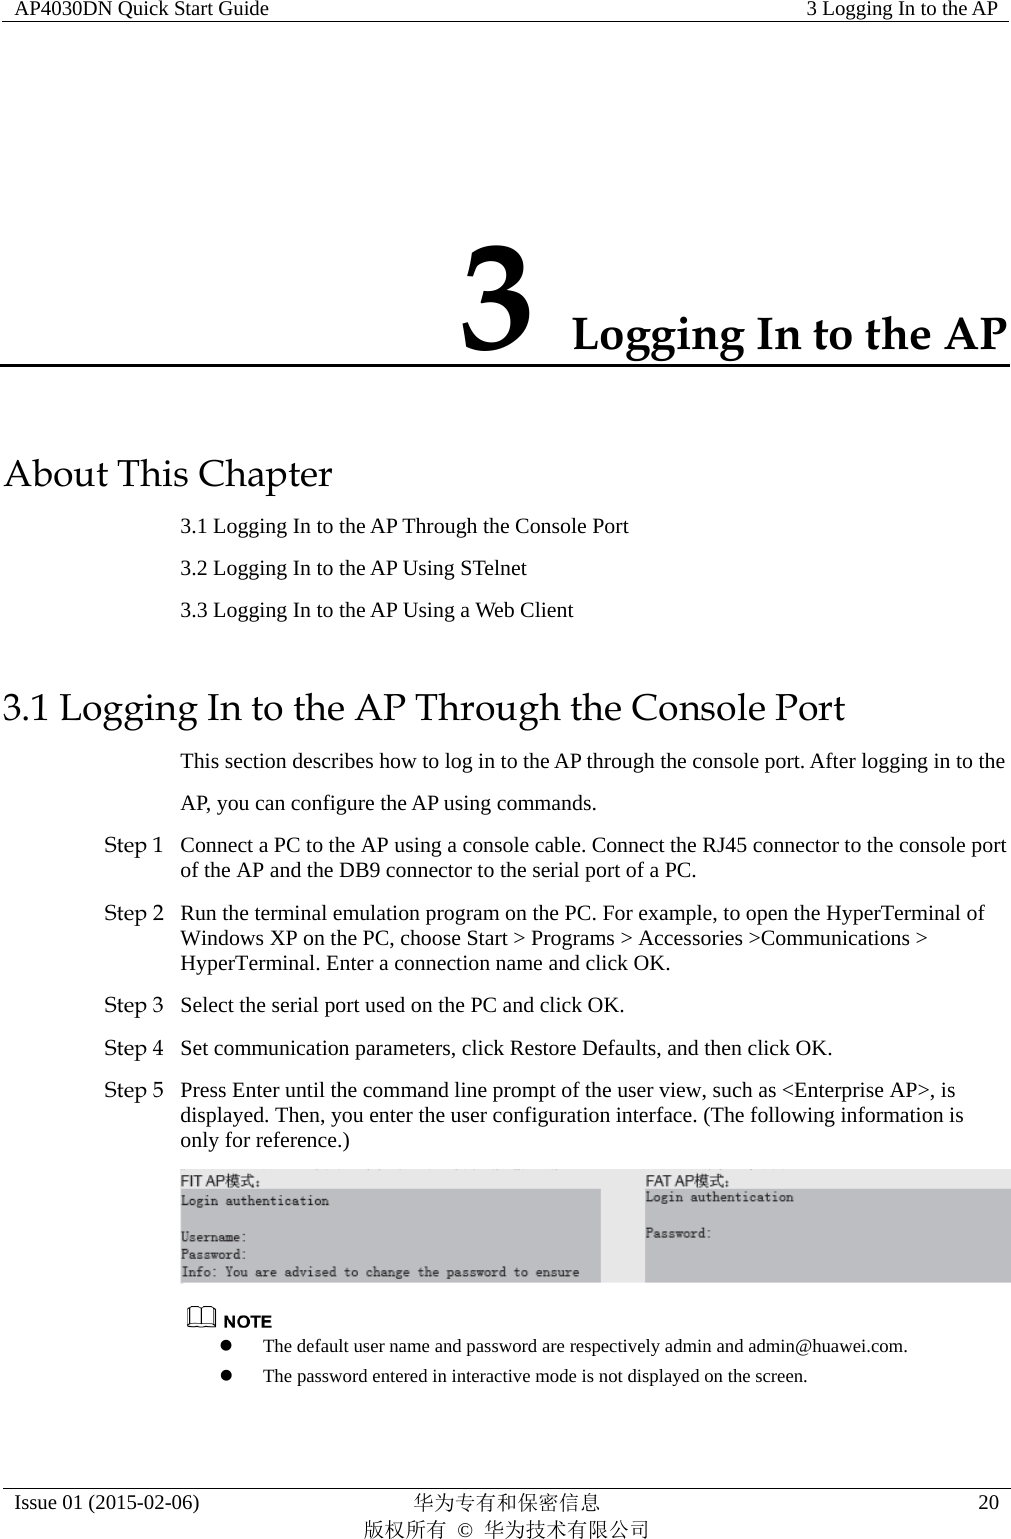 AP4030DN Quick Start Guide  3 Logging In to the AP Issue 01 (2015-02-06)  华为专有和保密信息        版权所有 © 华为技术有限公司 20 3 Logging In to the AP About This Chapter 3.1 Logging In to the AP Through the Console Port 3.2 Logging In to the AP Using STelnet 3.3 Logging In to the AP Using a Web Client 3.1 Logging In to the AP Through the Console Port This section describes how to log in to the AP through the console port. After logging in to the AP, you can configure the AP using commands. Step 1 Connect a PC to the AP using a console cable. Connect the RJ45 connector to the console port of the AP and the DB9 connector to the serial port of a PC. Step 2 Run the terminal emulation program on the PC. For example, to open the HyperTerminal of Windows XP on the PC, choose Start &gt; Programs &gt; Accessories &gt;Communications &gt; HyperTerminal. Enter a connection name and click OK. Step 3 Select the serial port used on the PC and click OK. Step 4 Set communication parameters, click Restore Defaults, and then click OK. Step 5 Press Enter until the command line prompt of the user view, such as &lt;Enterprise AP&gt;, is displayed. Then, you enter the user configuration interface. (The following information is only for reference.)    The default user name and password are respectively admin and admin@huawei.com.  The password entered in interactive mode is not displayed on the screen. 